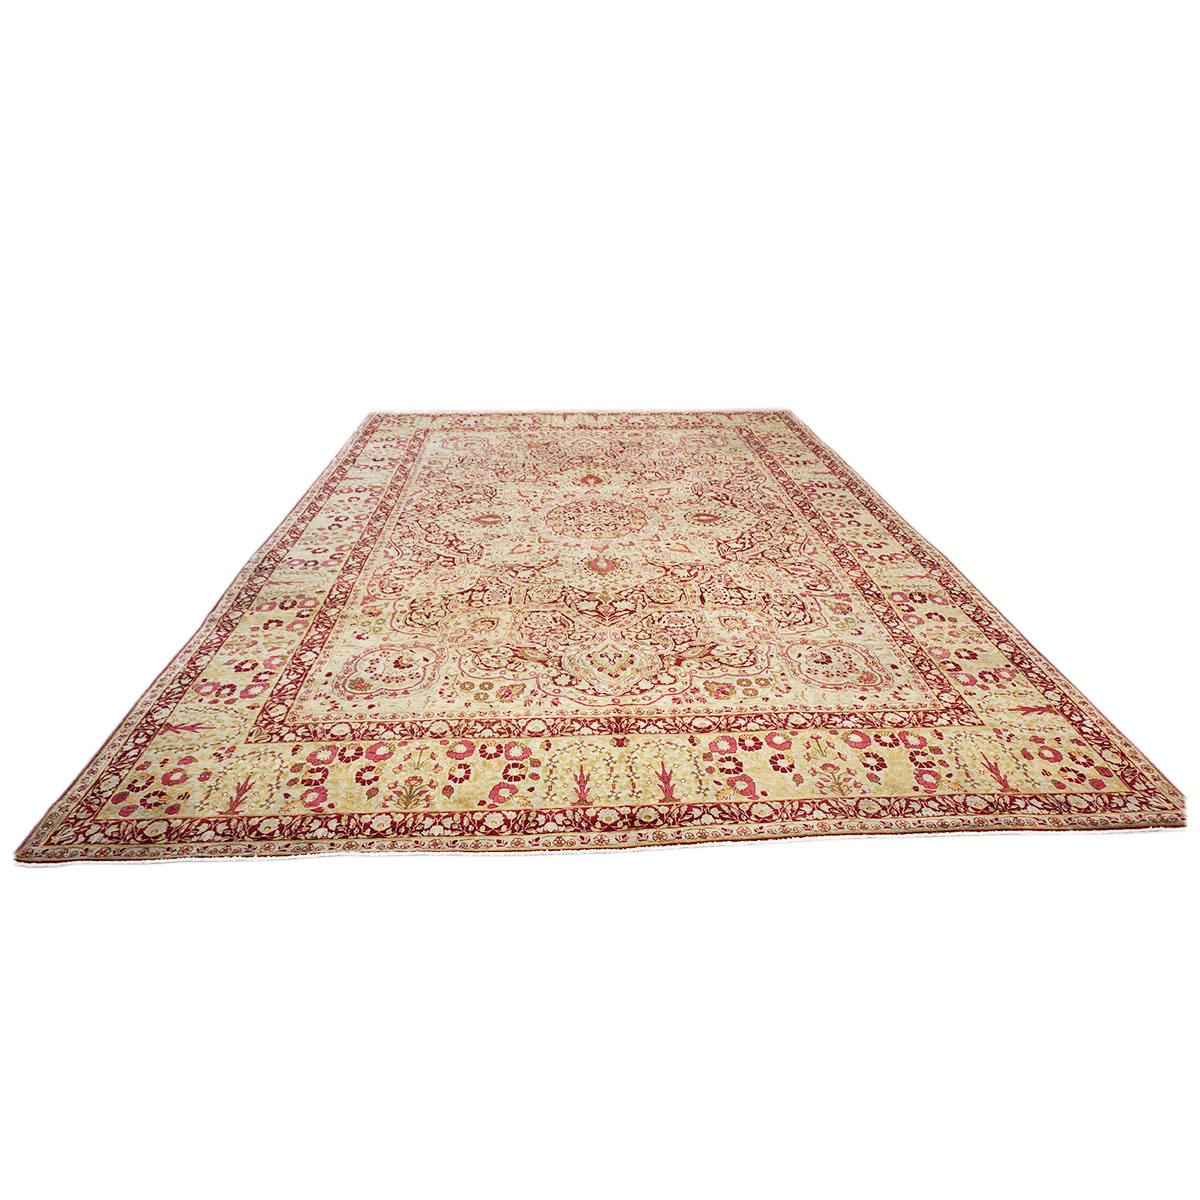 10x16 rugs for sale